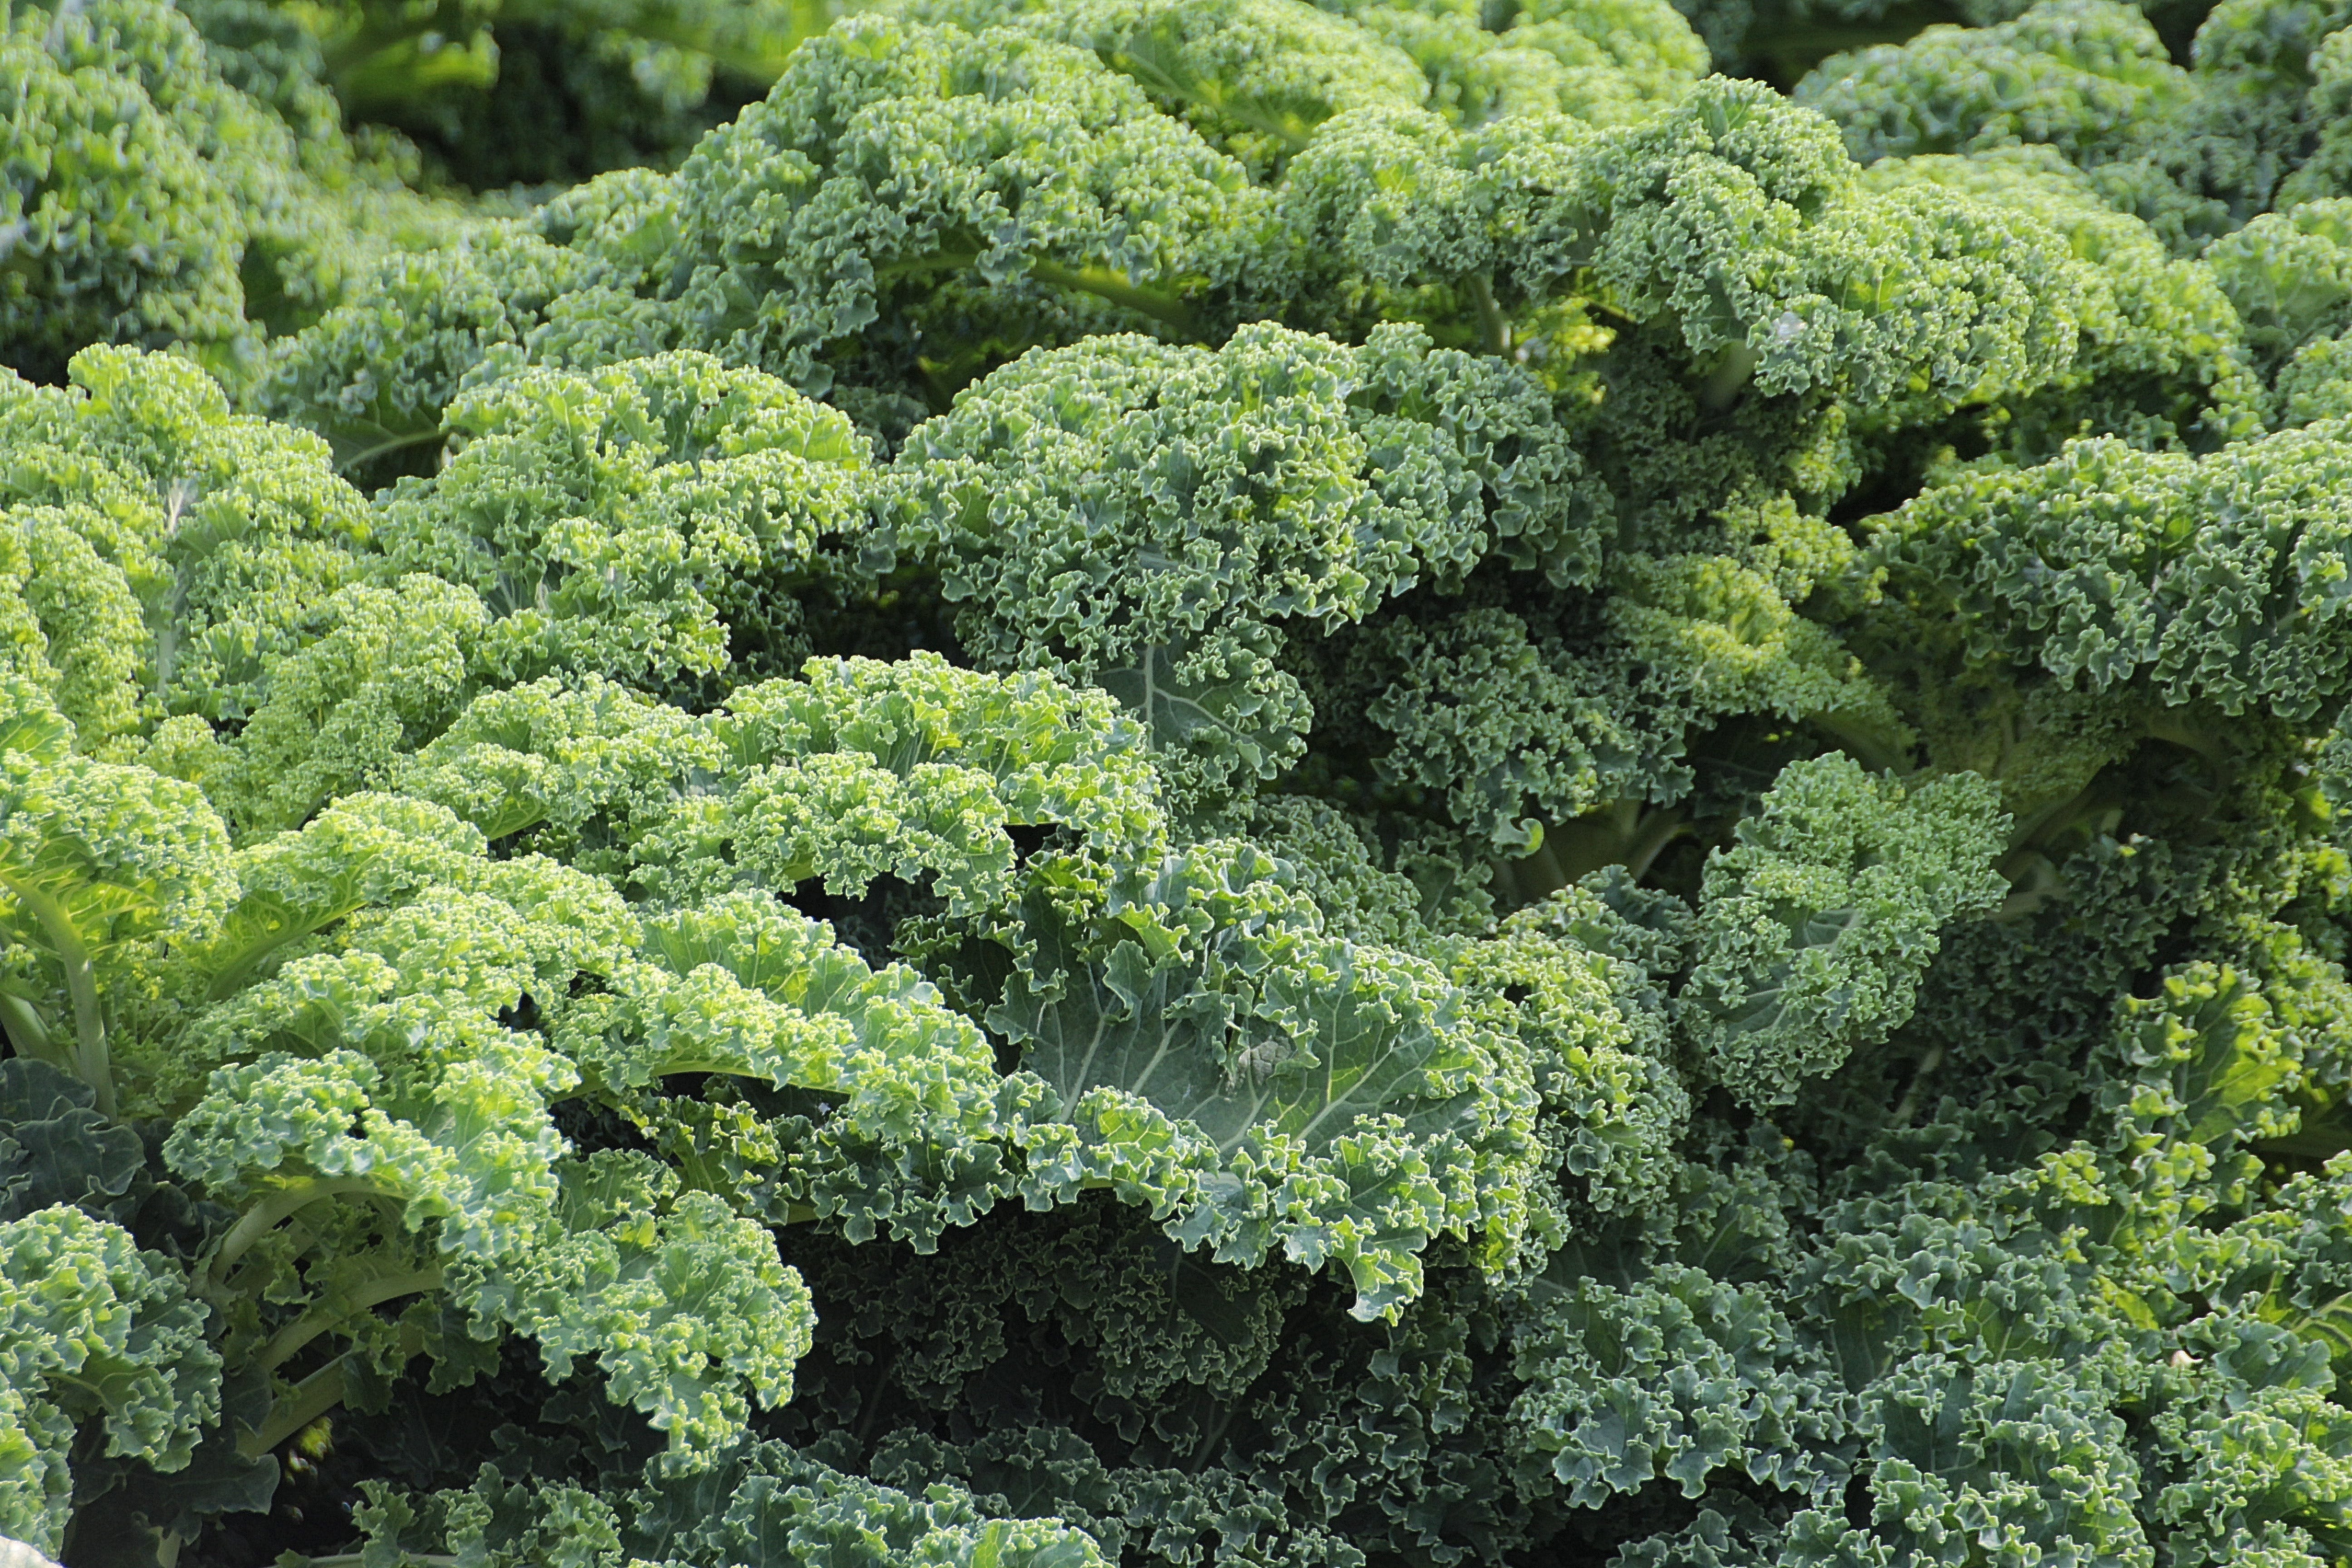 (LISTEN) Do grocery stores order extra kale in January?